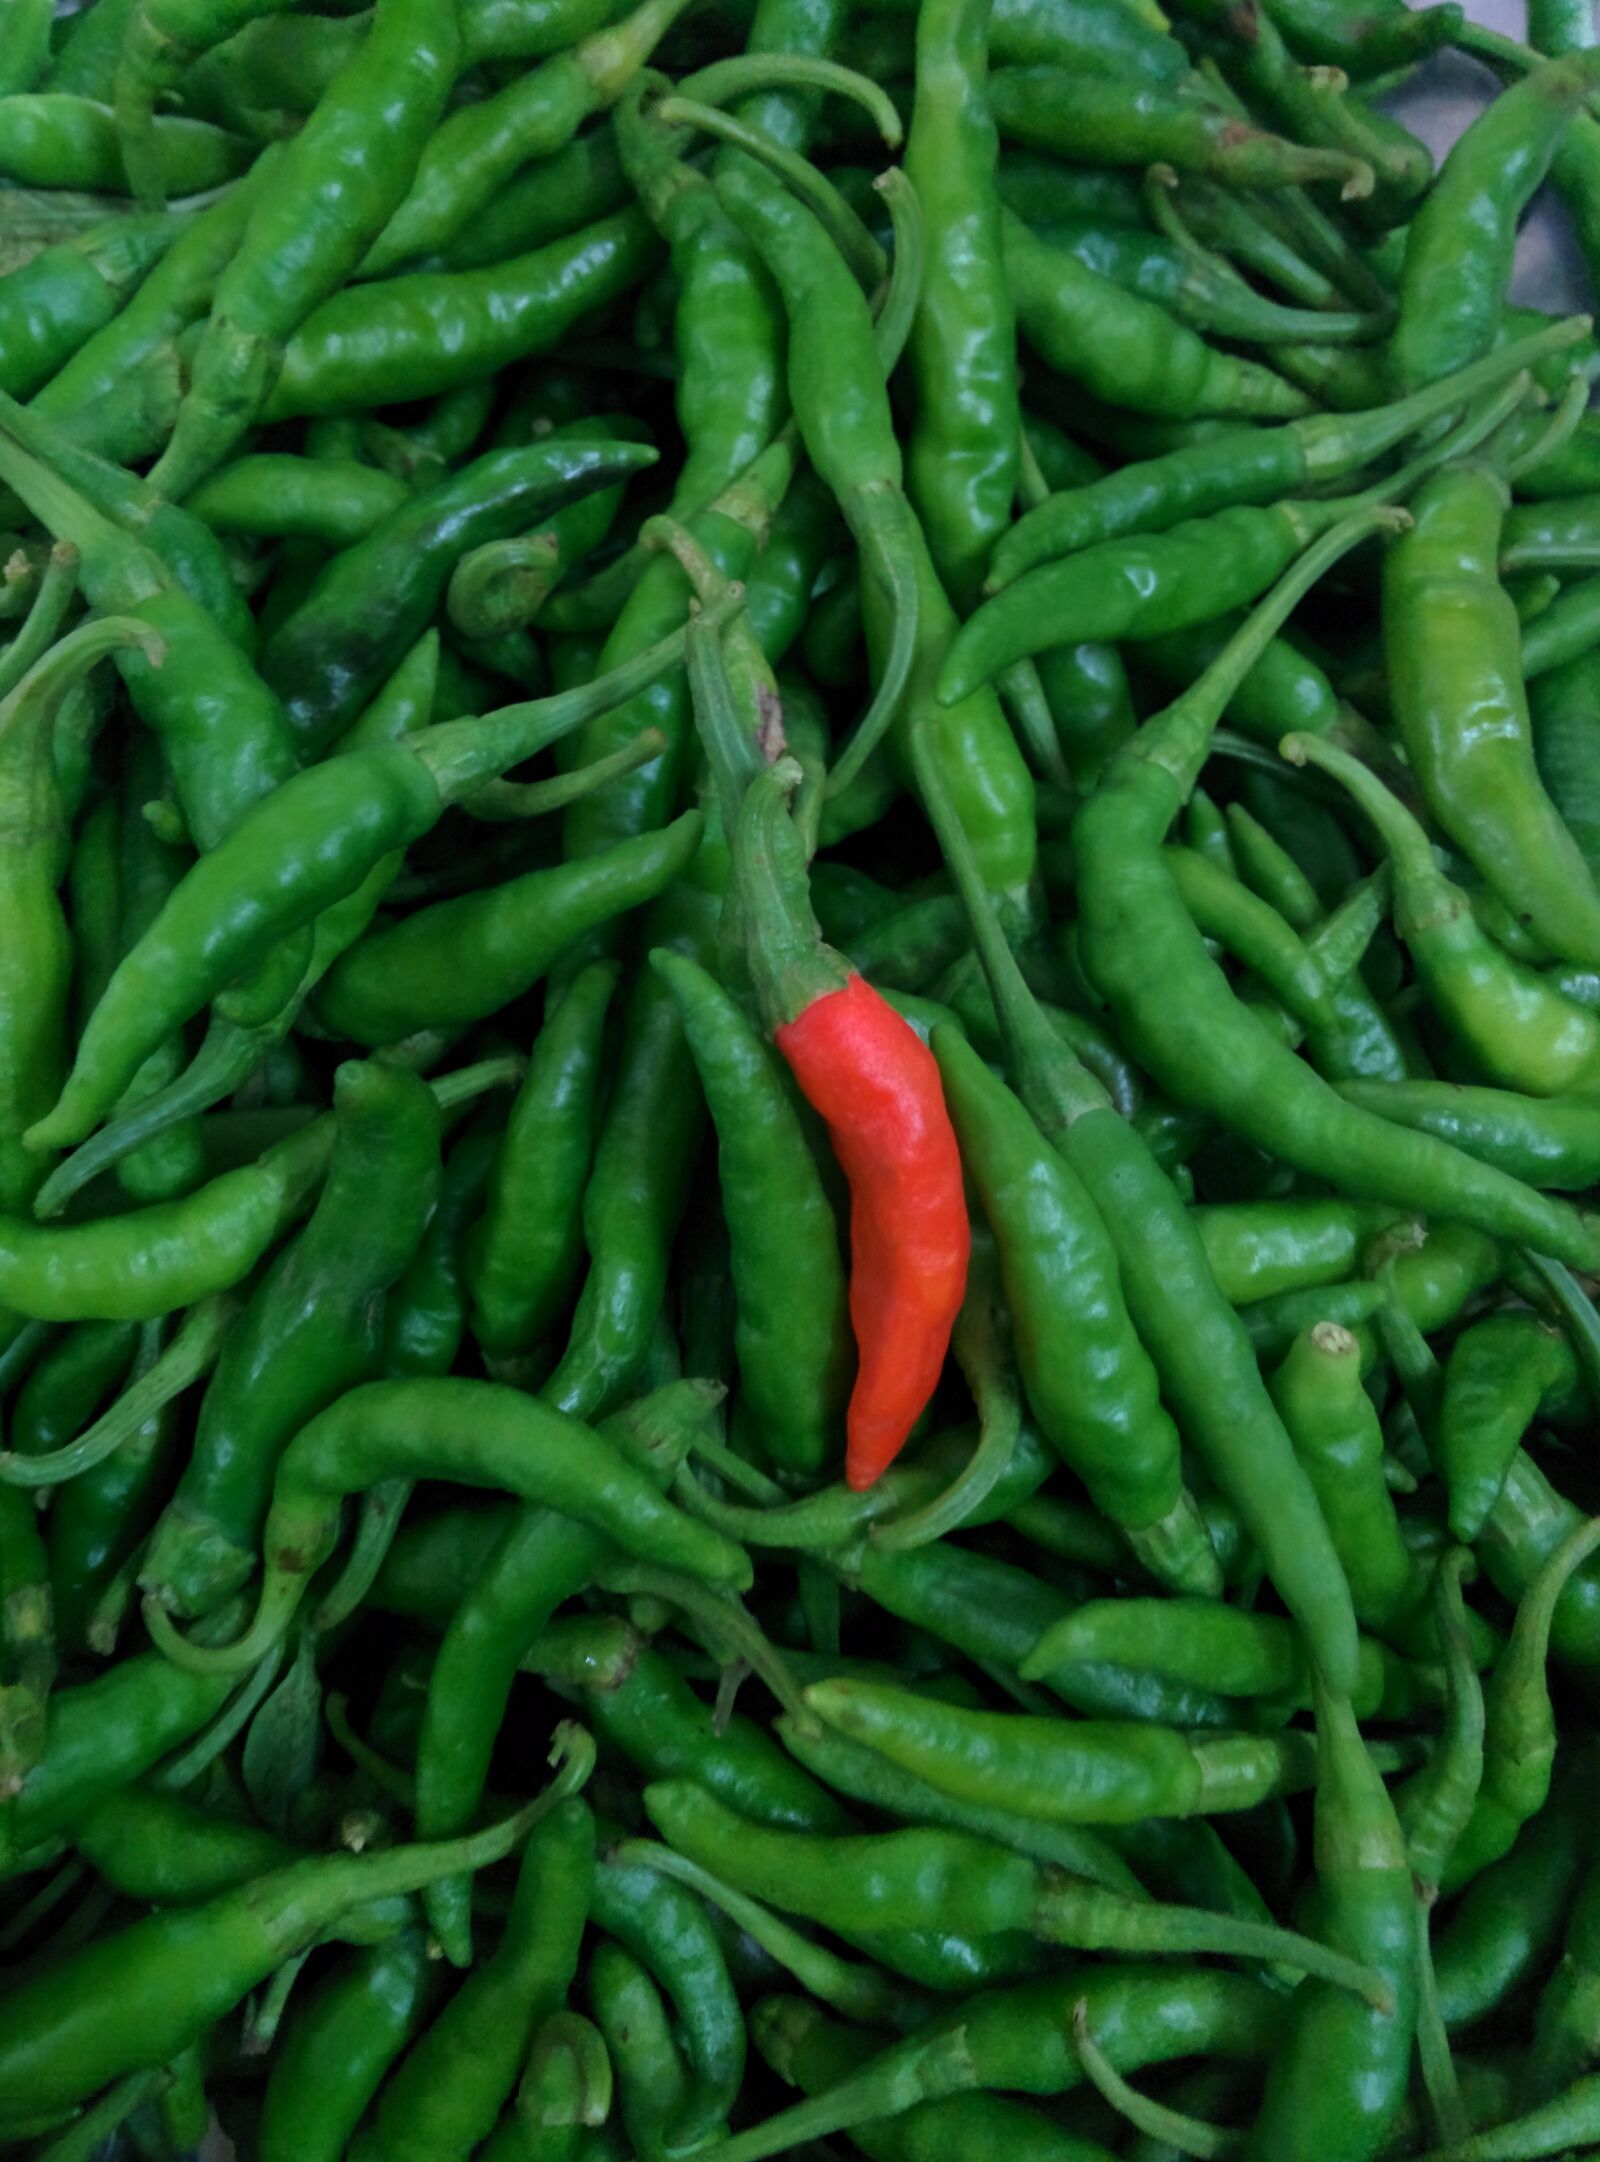 LG Nexus 5 sample photo. Chilies, green, red photography